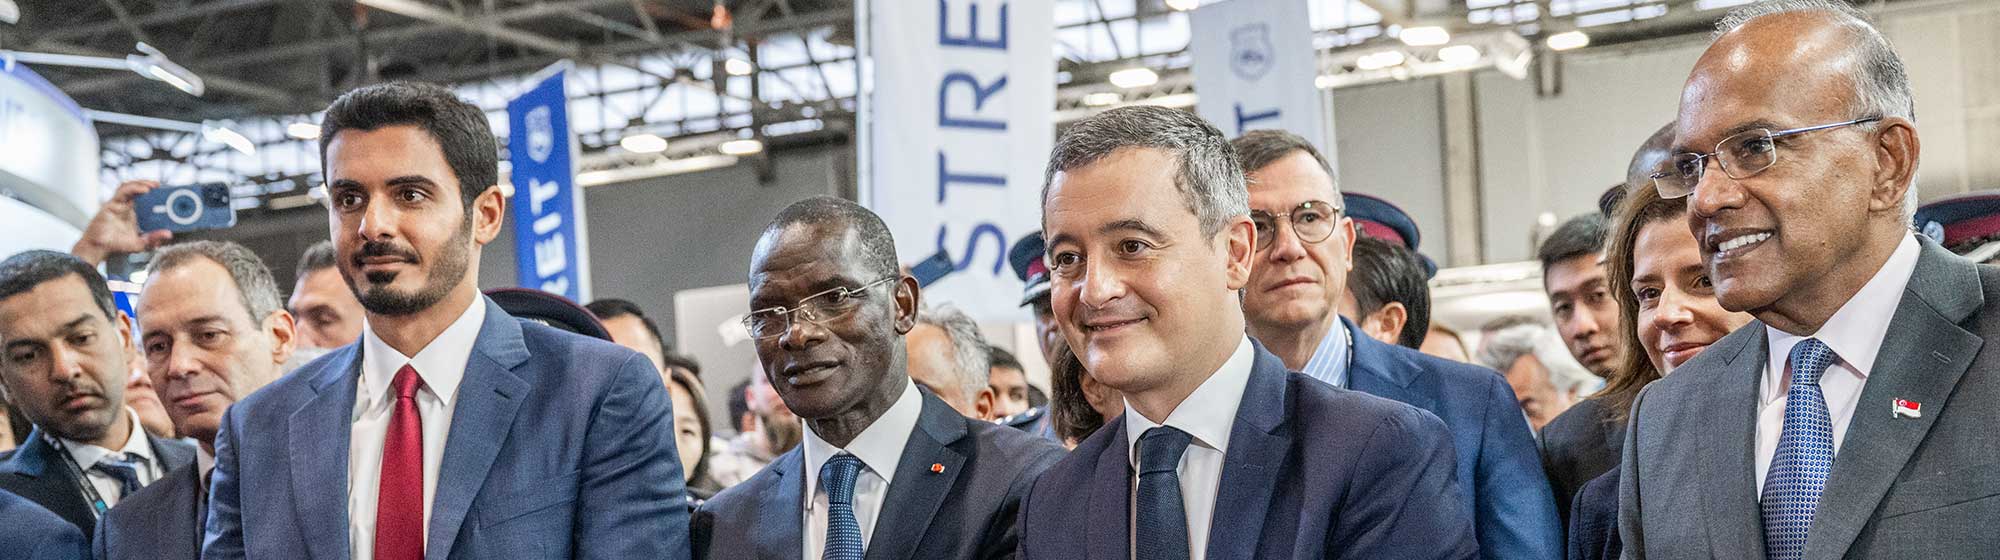 Gérald Darmanin, French Minister of the Interior, accompanied by numerous official French and international delegations at Milipol Paris Inauguration